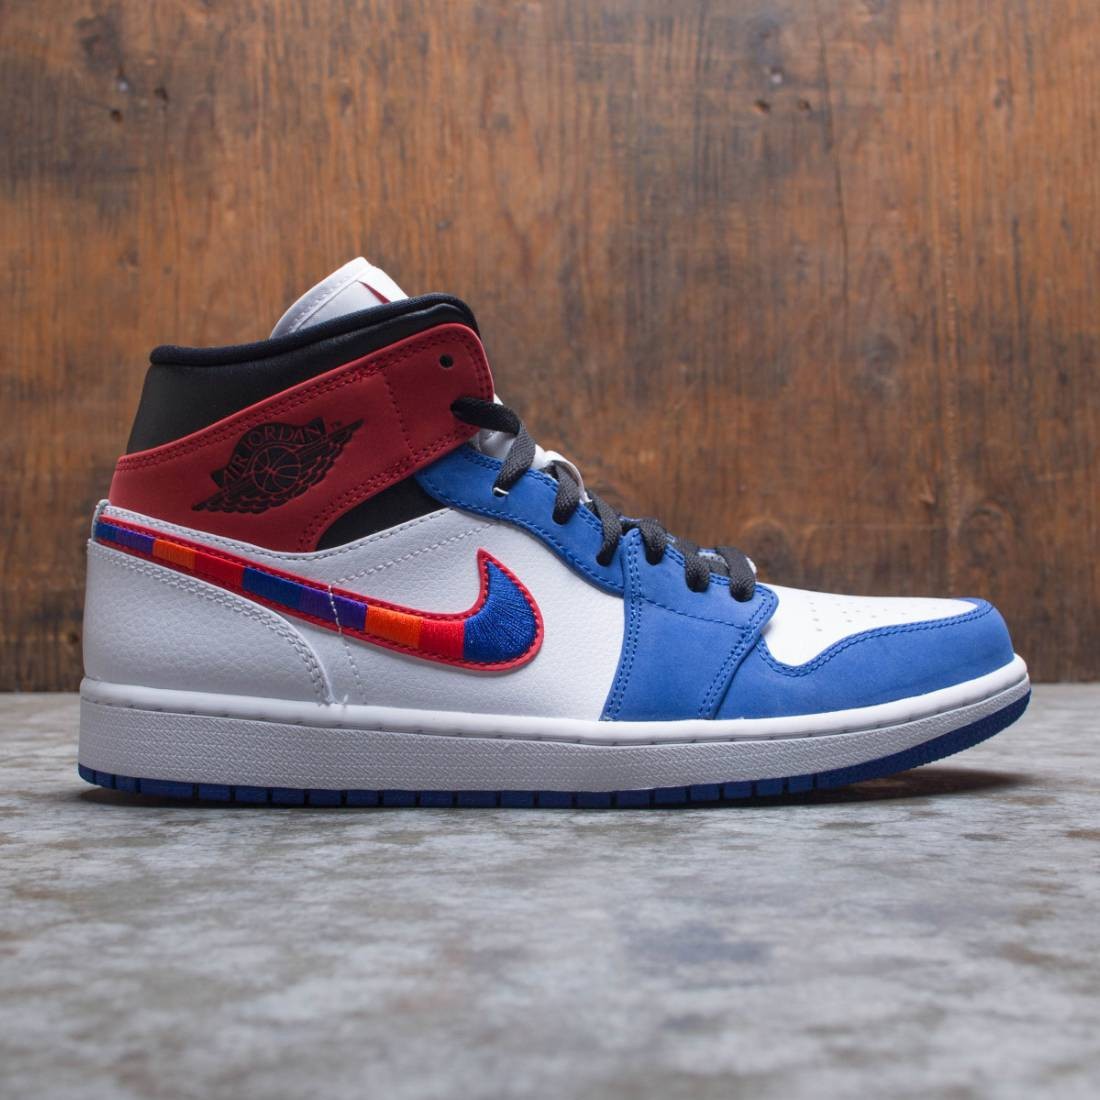 red white and blue jordan ones